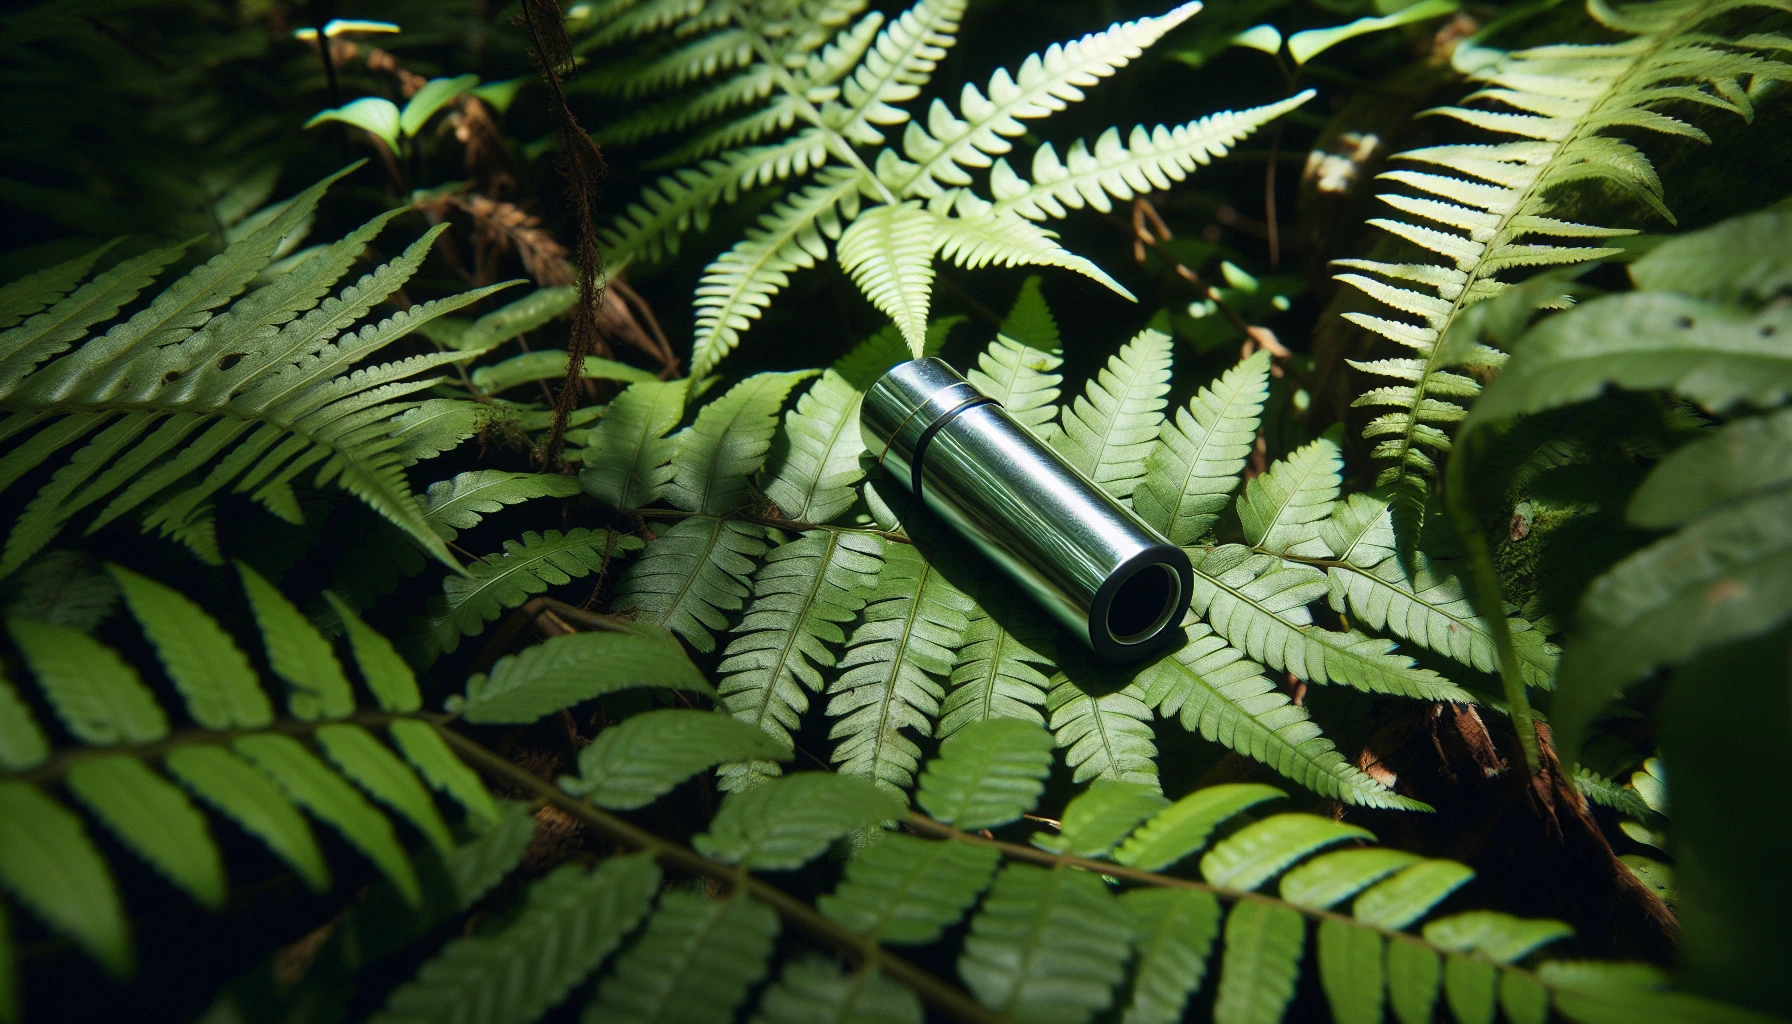 A discreet and portable pipe surrounded by greenery